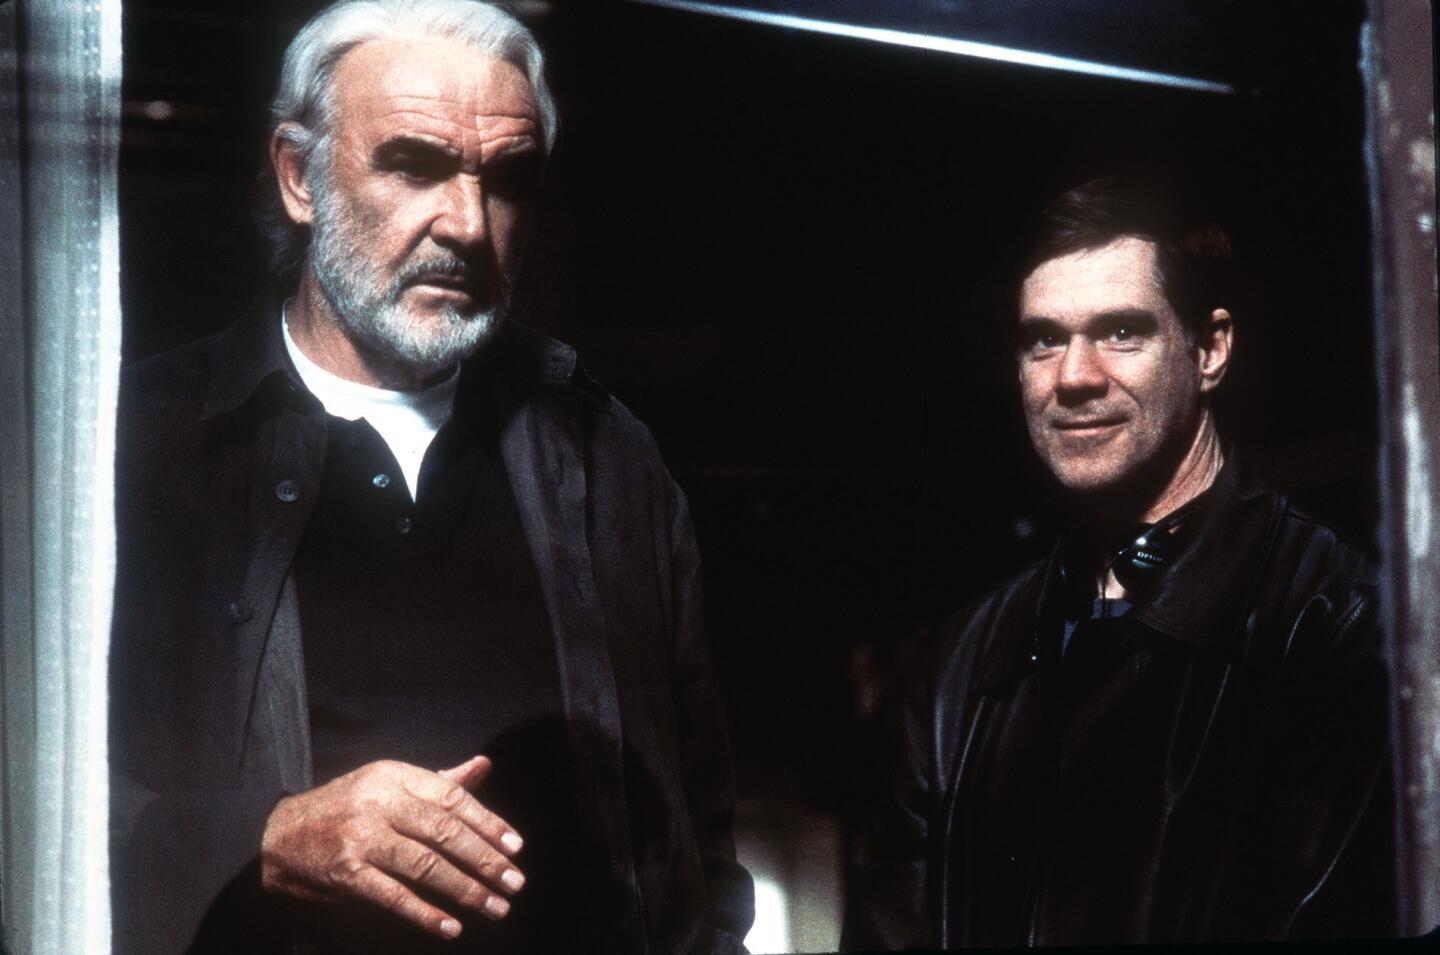 Oscar-nominated director Gus Van Sant, right, poses next to Connery on the set of his 2000 film "Finding Forrester."